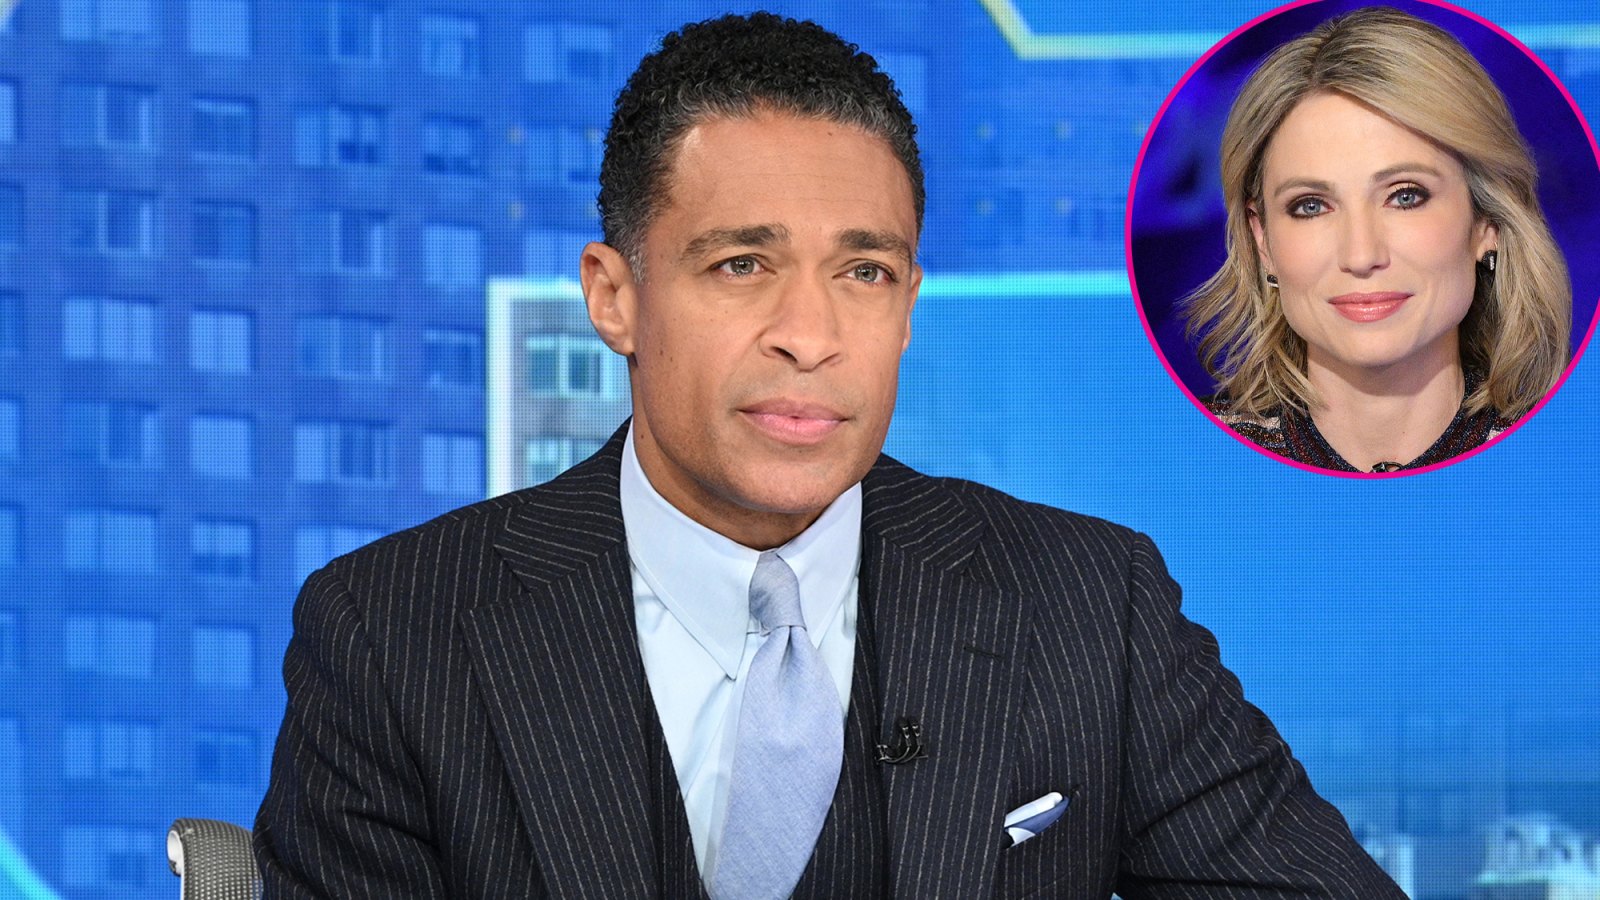 GMA3’s T.J. Holmes Once Defended Marriage Before Amy Robach Scandal: It ‘Gets a Bad Rap’